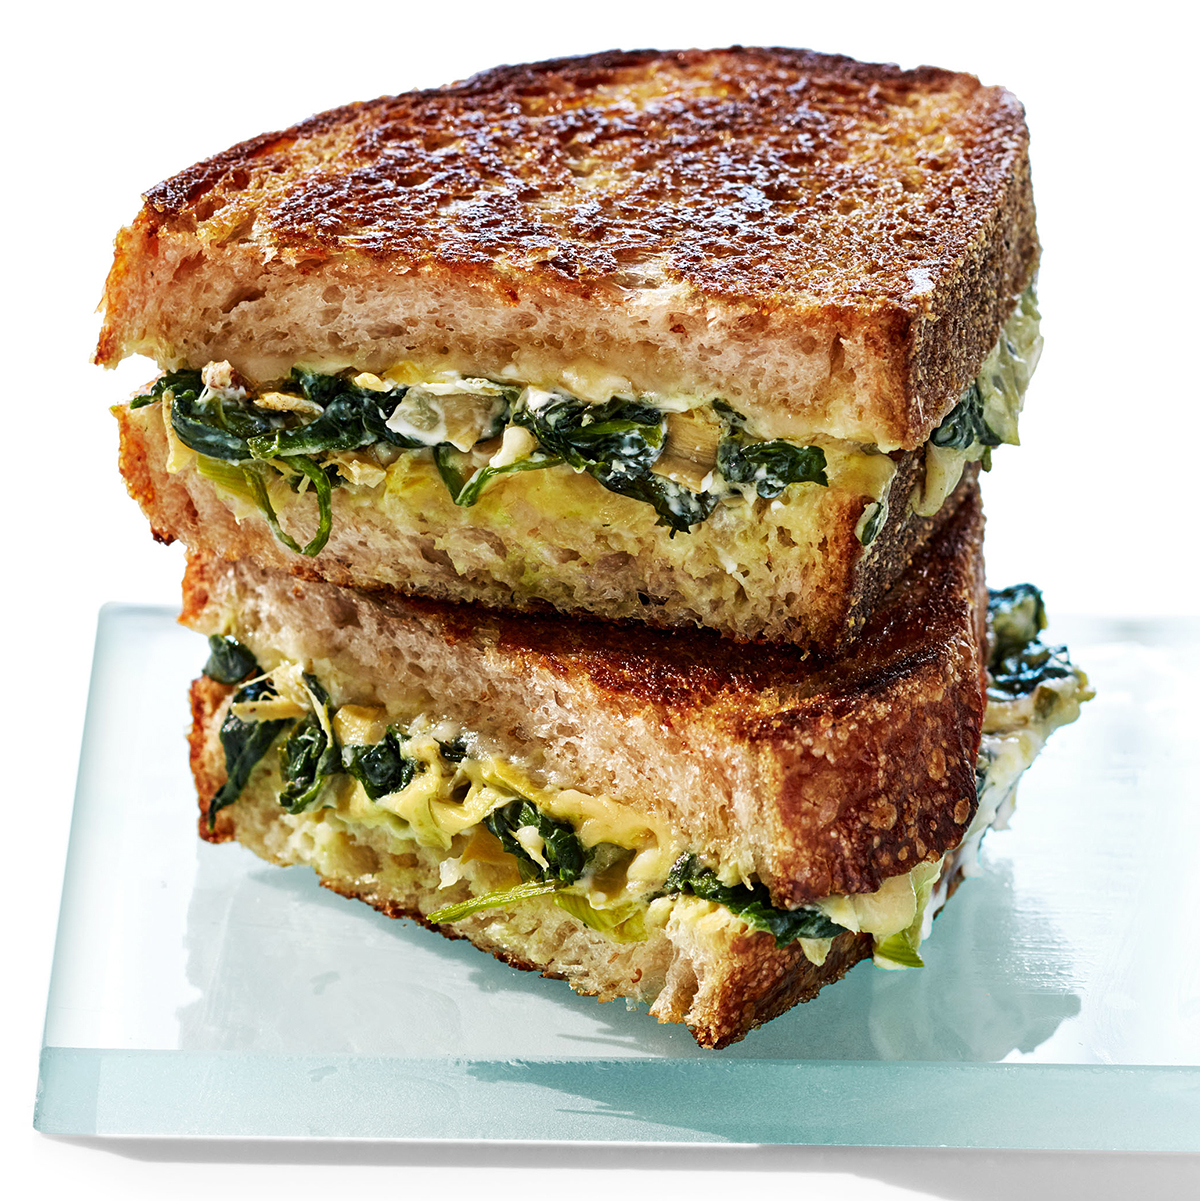 Spinach-Artichoke Grilled Cheese